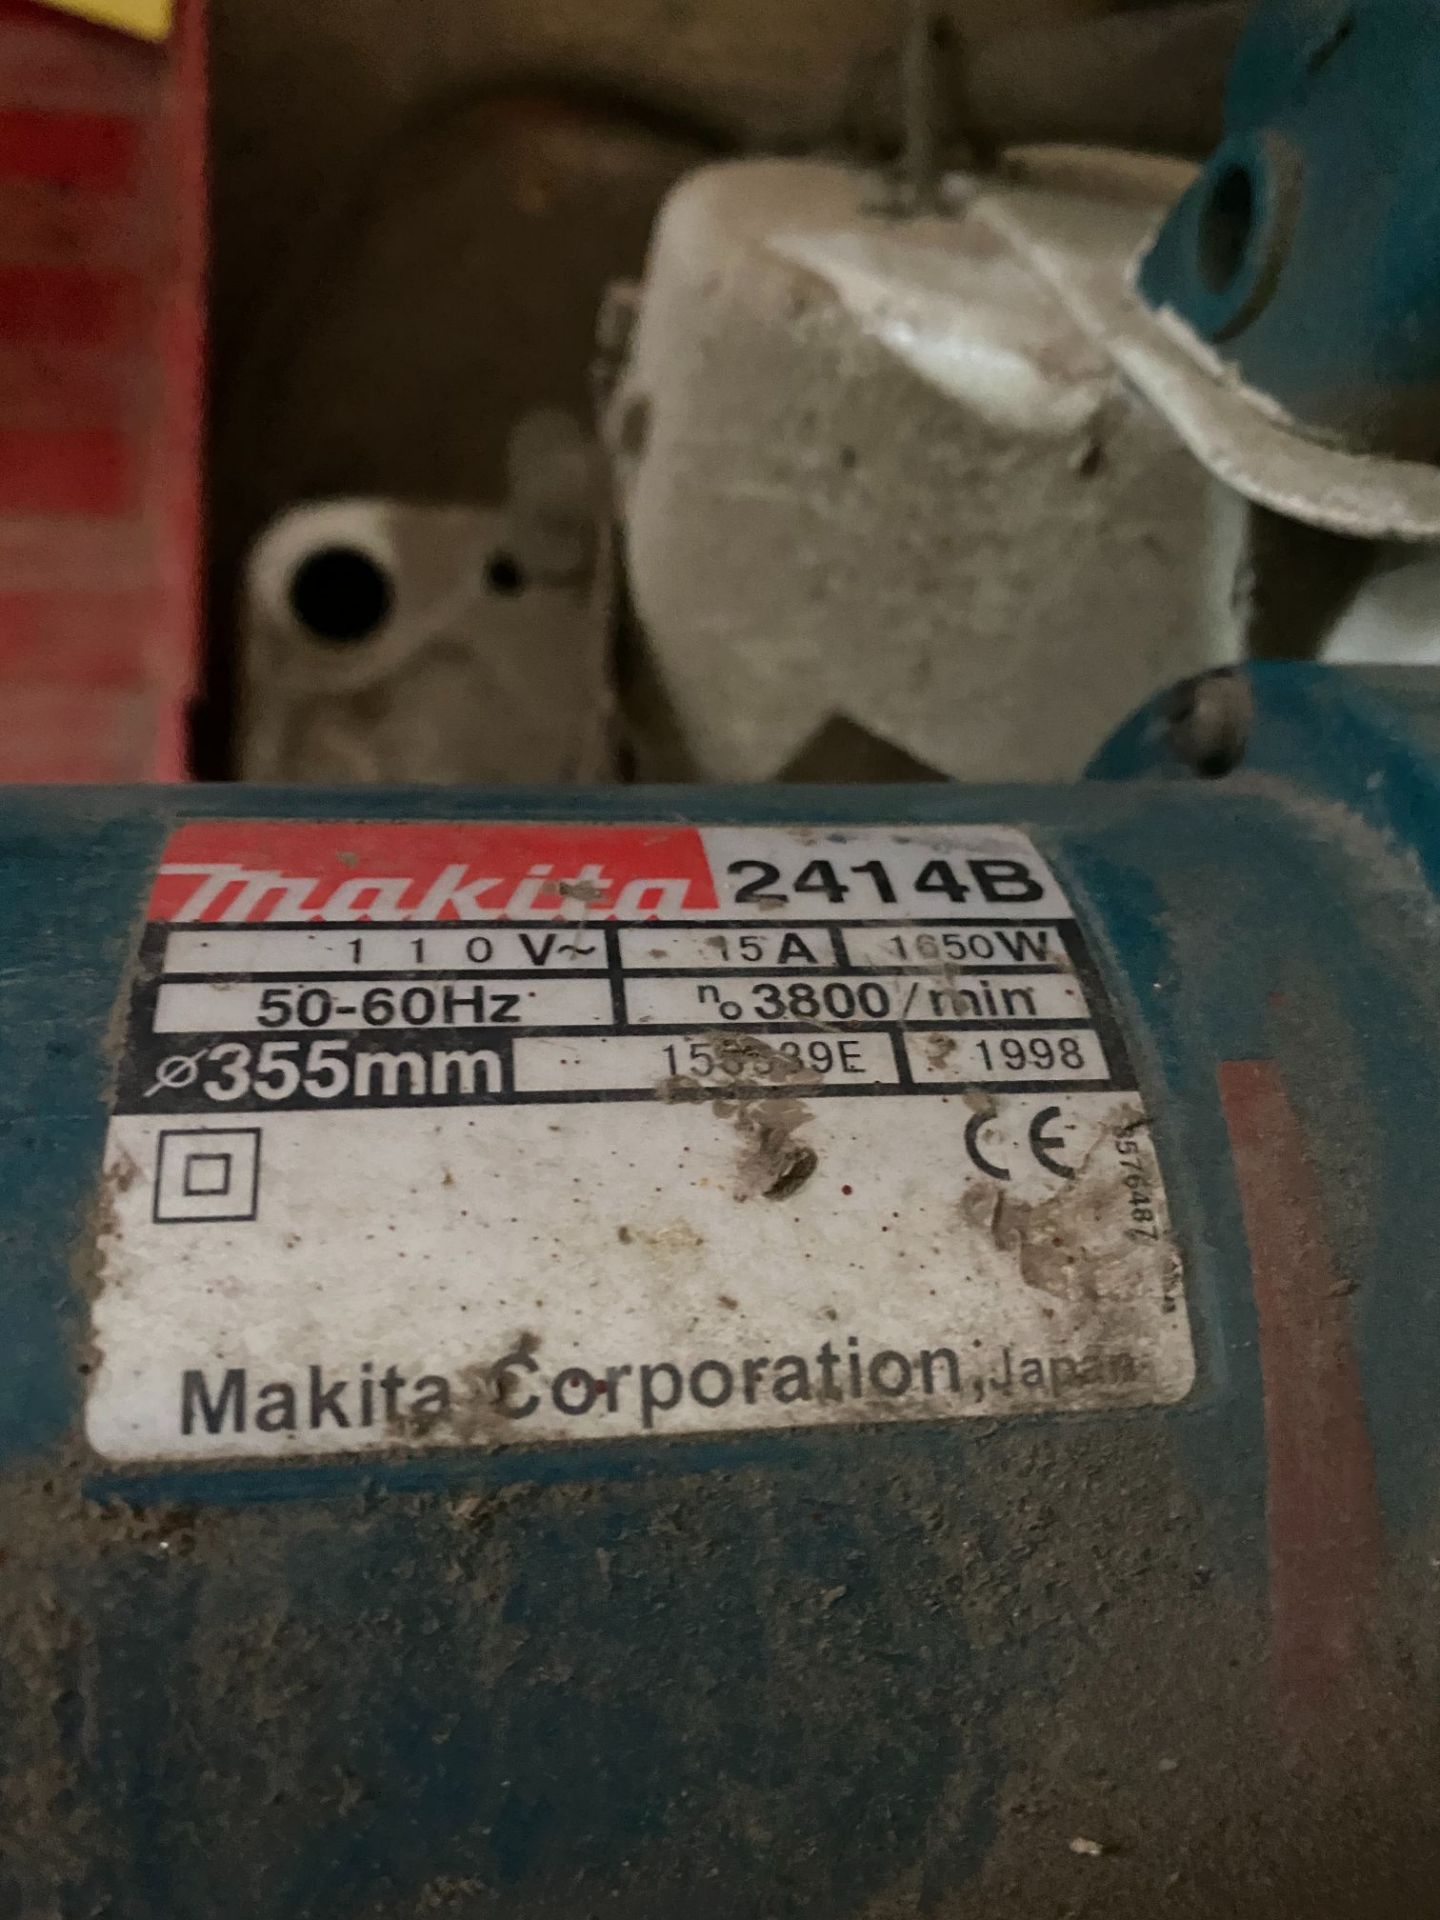 Makita 2414B cut-off saw, serial no: 158539E (1998 - spares only) - Image 2 of 2